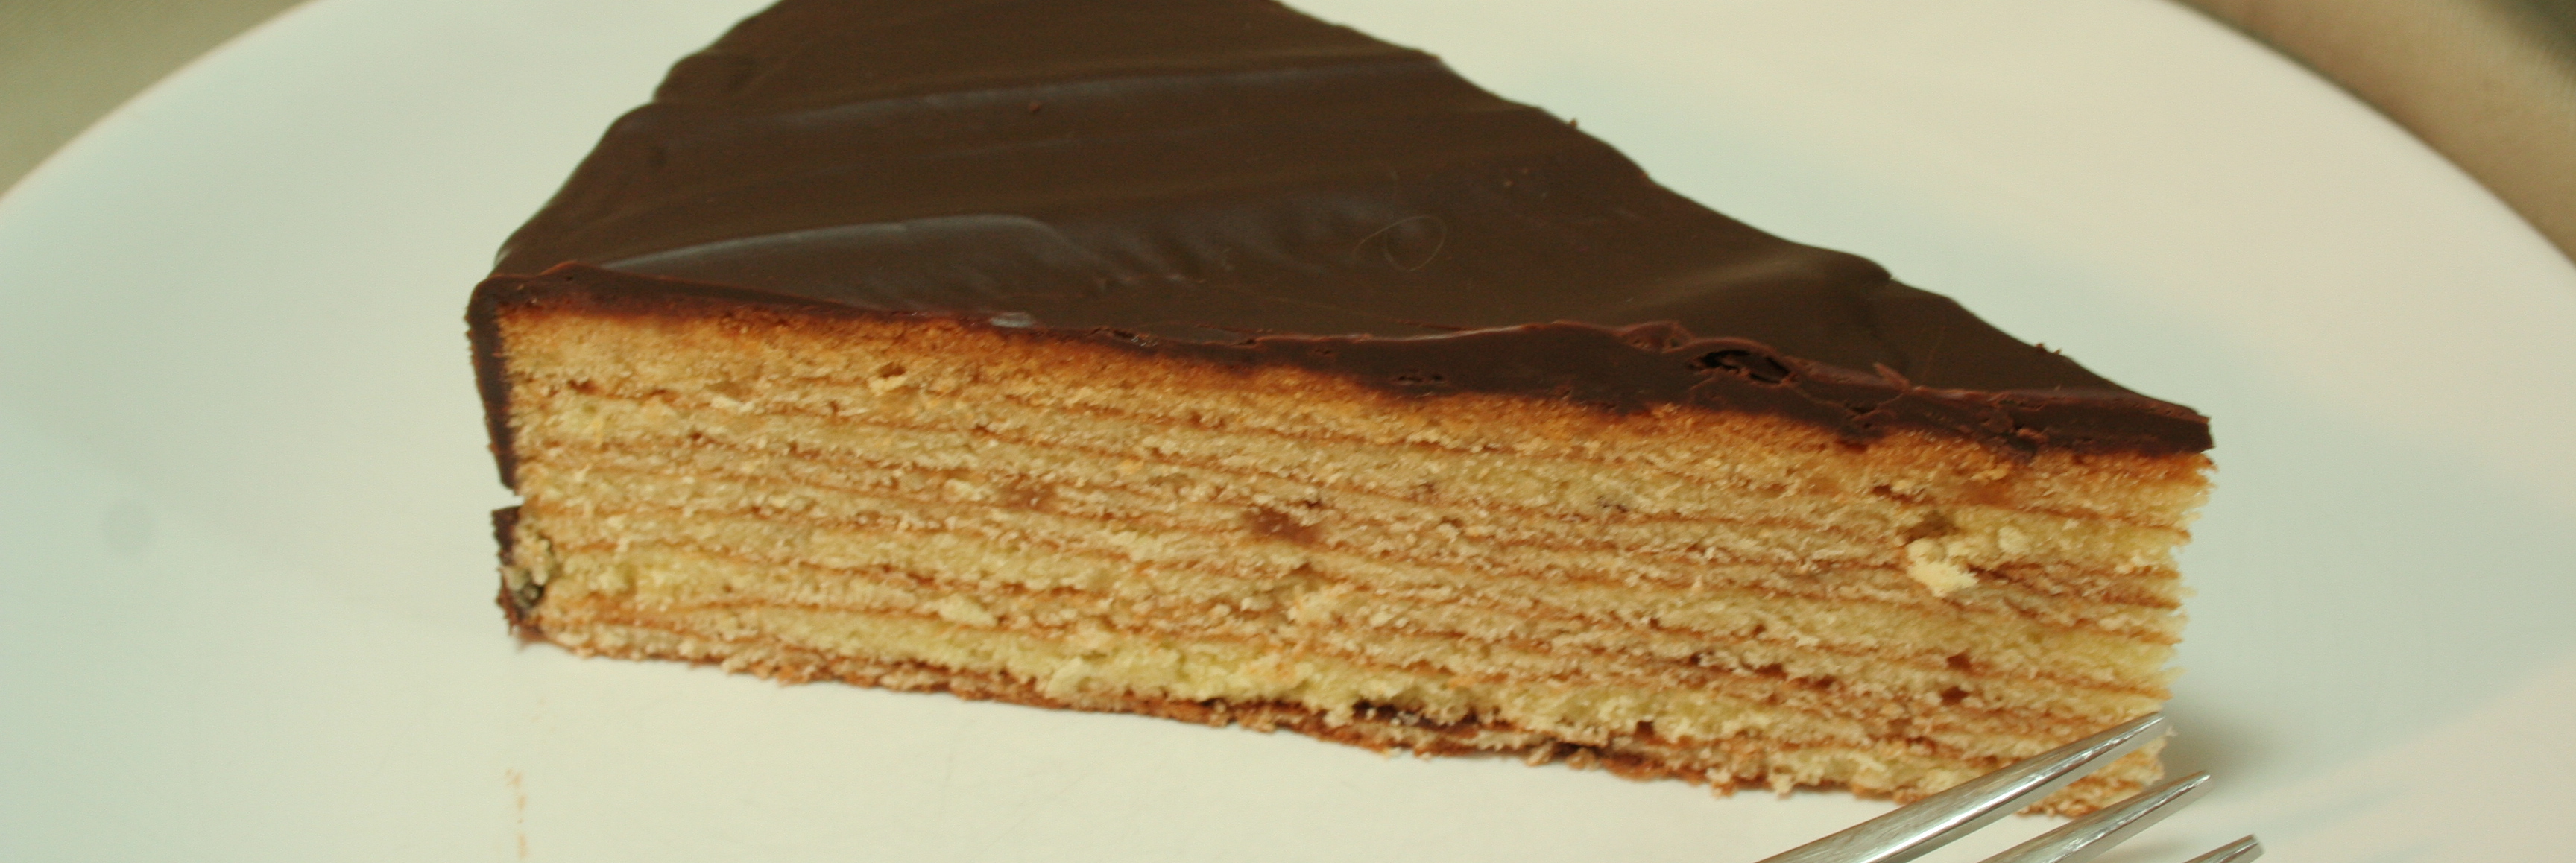 Baumkuchen: Multi-layered Tree Cake with chocolate couverture